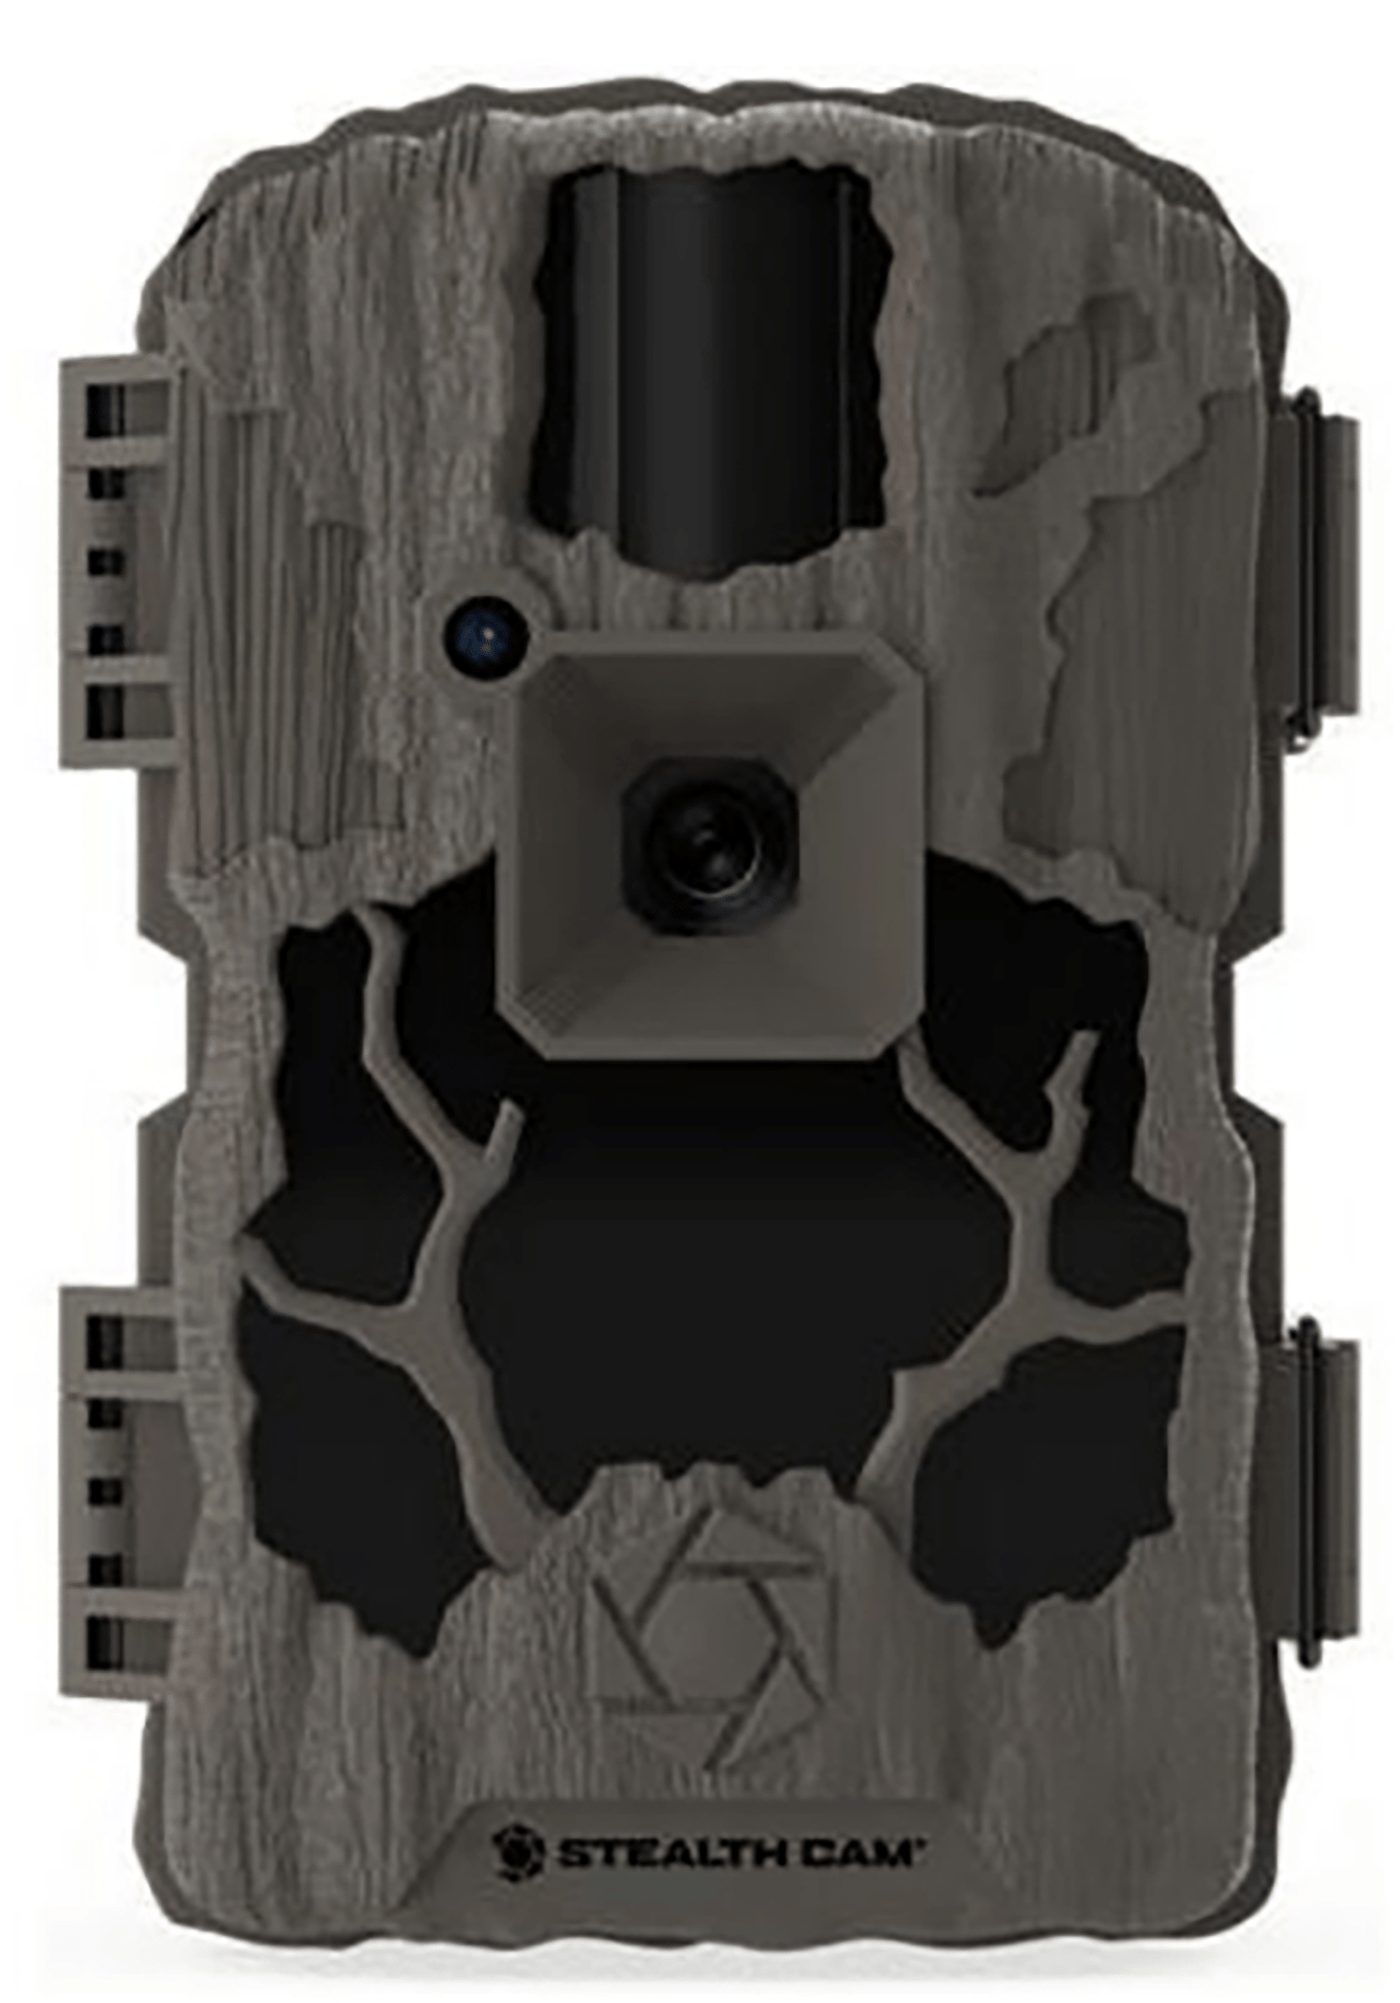 Stealth Cam Stealth Cam Prevue 26, Steal Stc-pxv26     26mp Prevue 2.4  Tft Screen Hunting